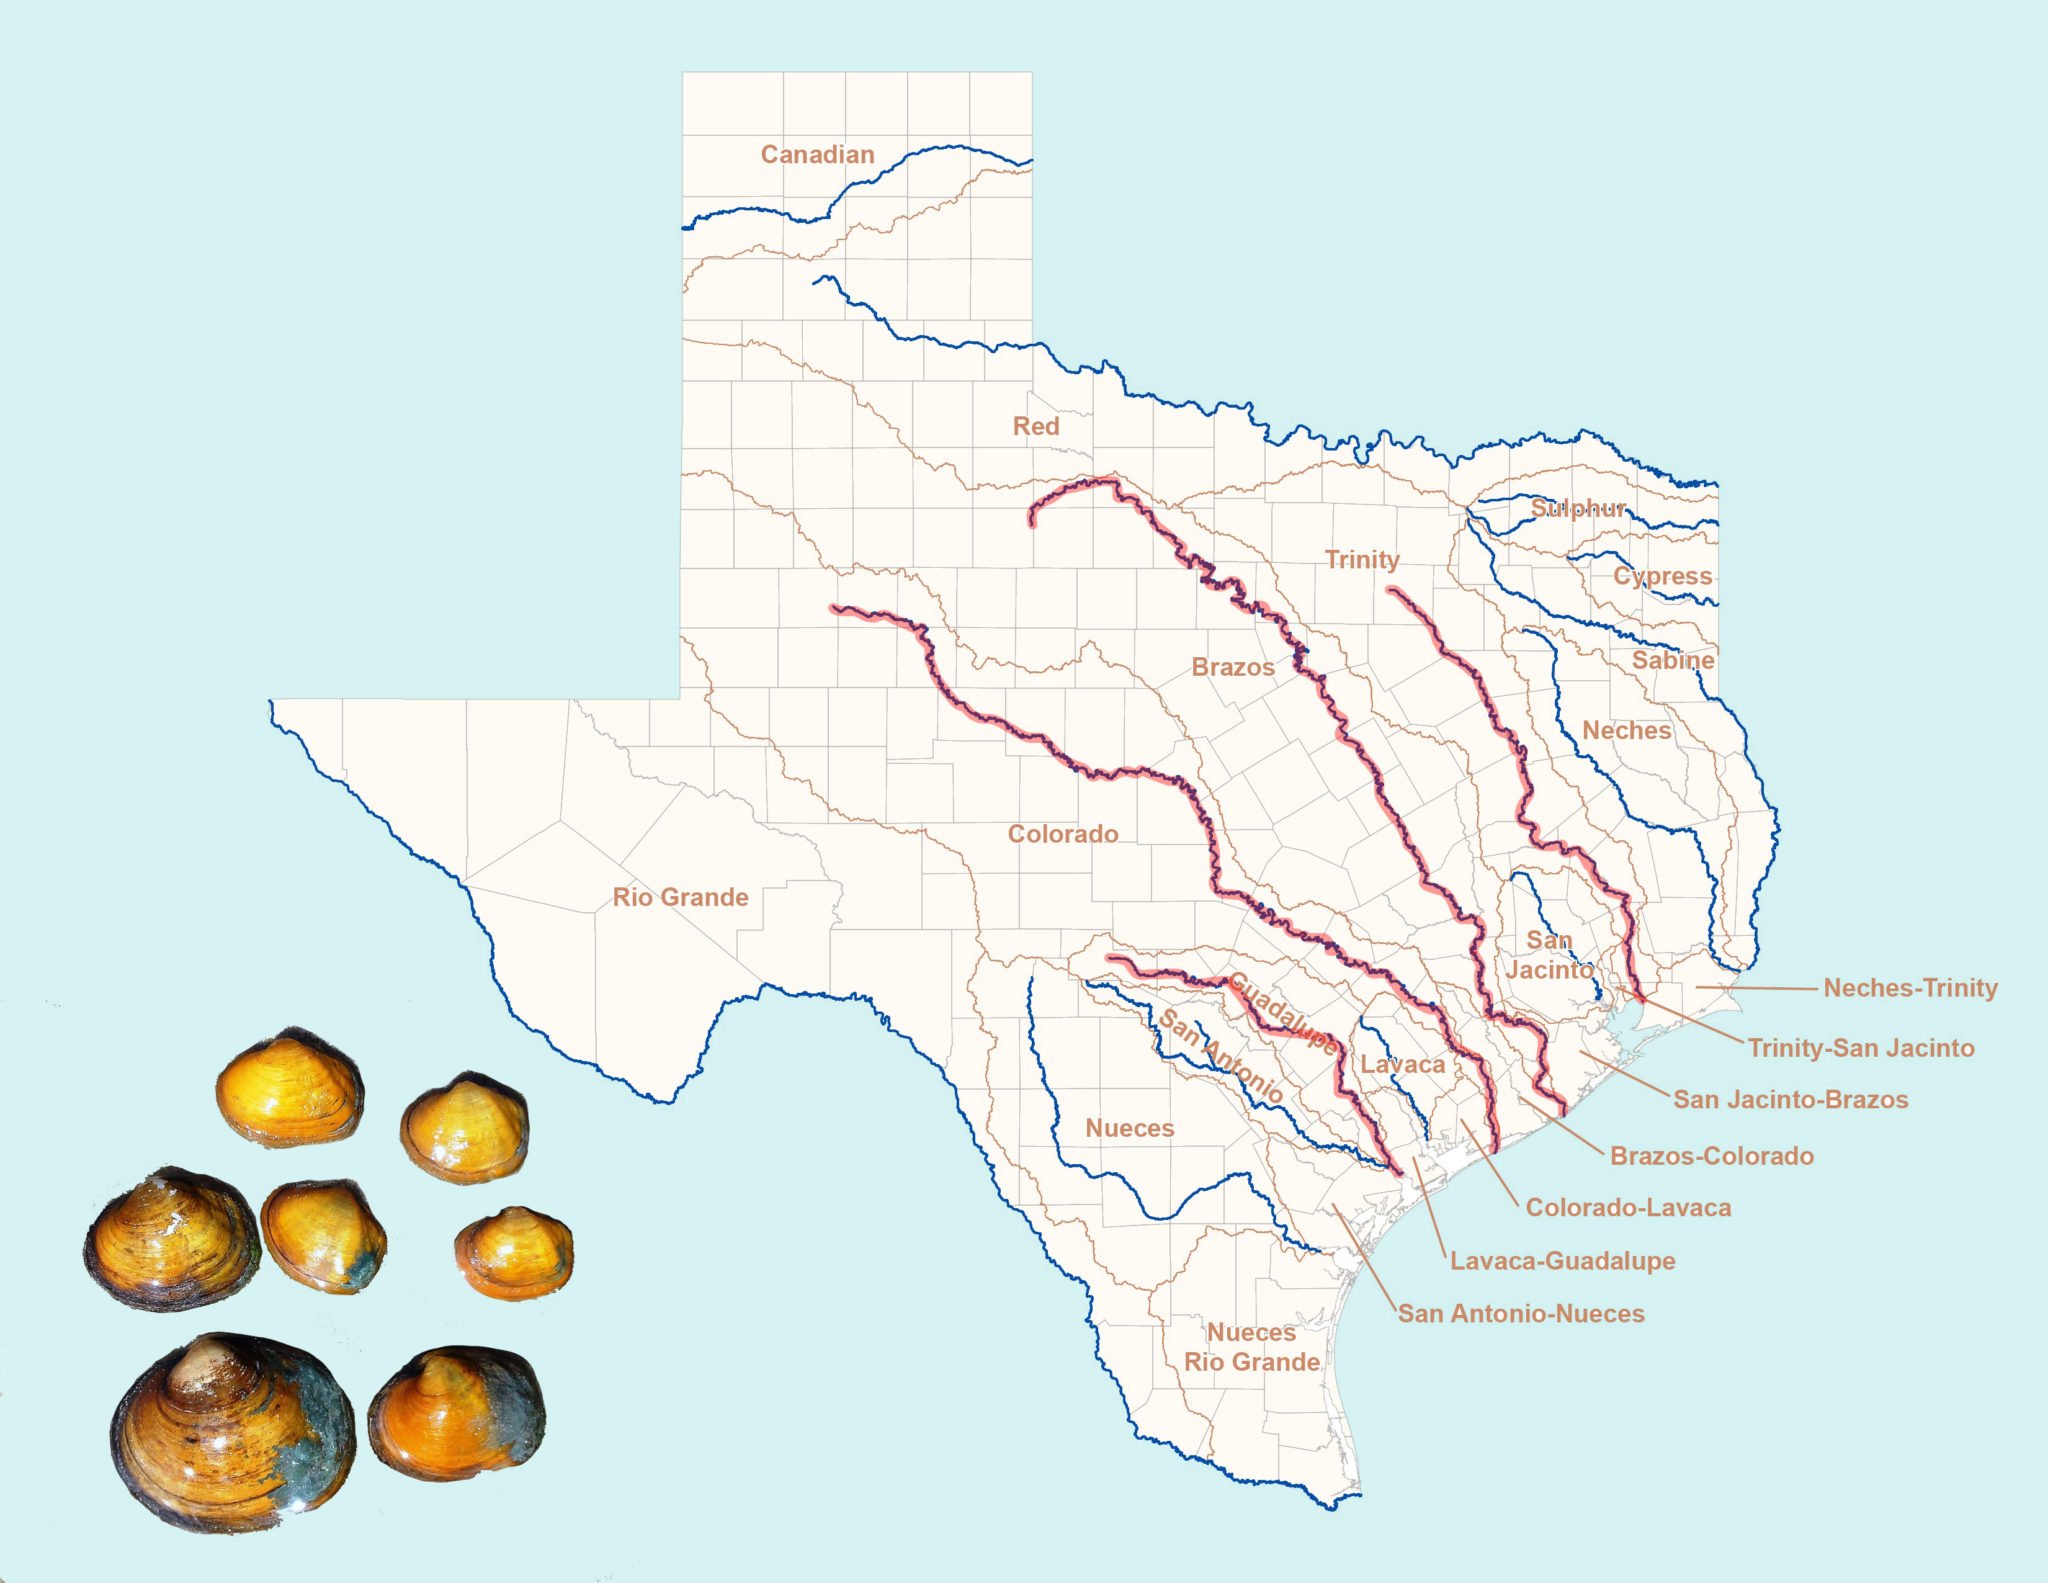 Unpublished Federal Report Projects Bleak Future For Texas Mussels